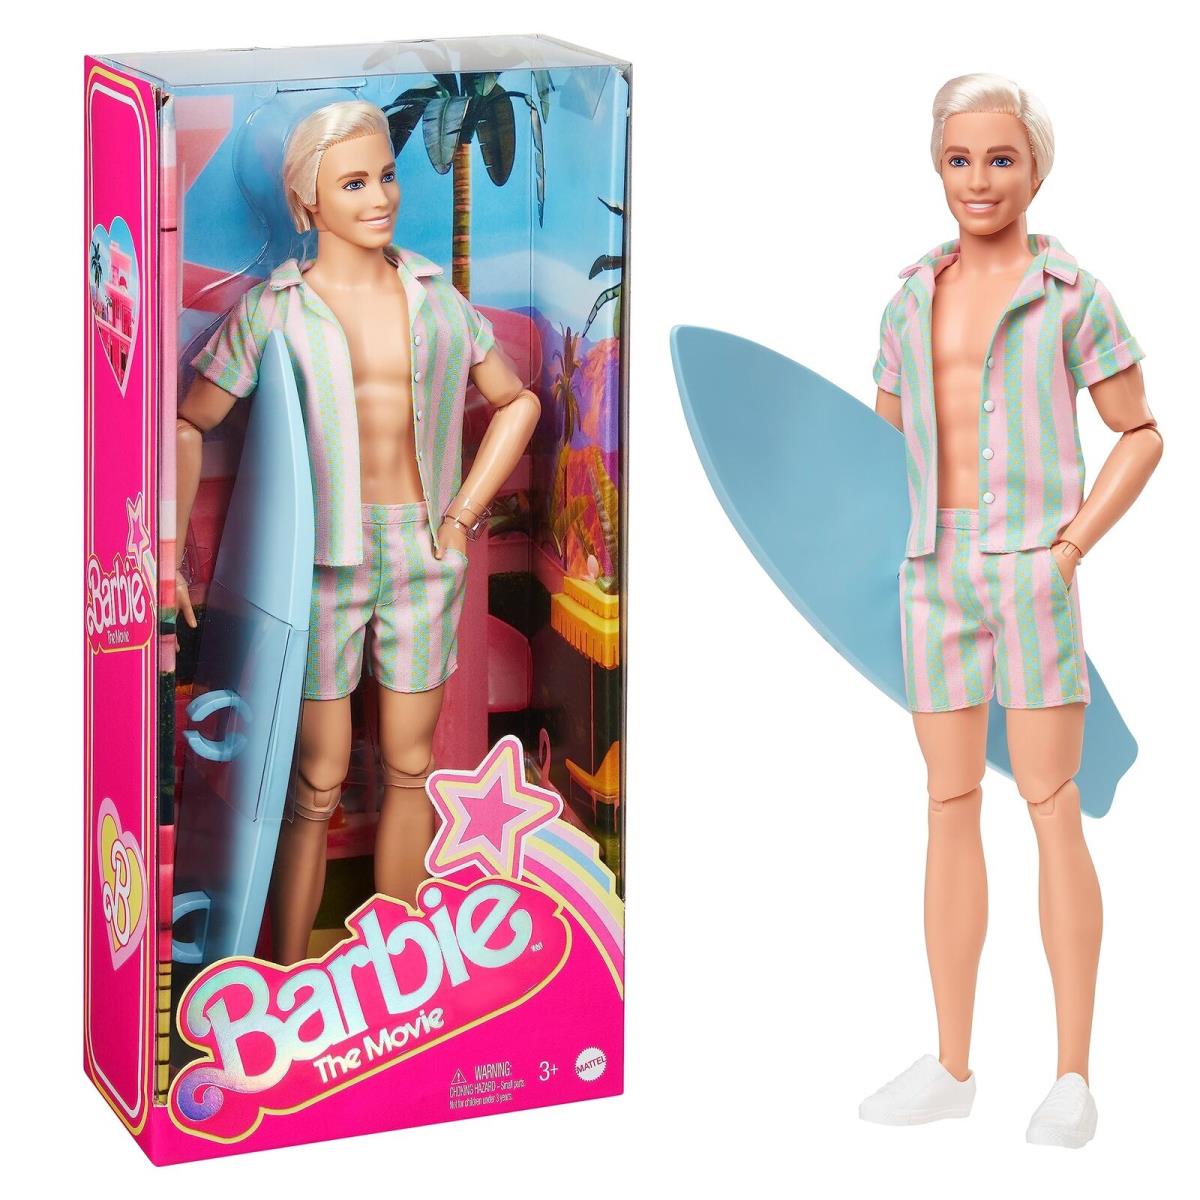 Barbie The Movie Ken Doll Wearing Pastel Pink and Green Striped Beach Matching